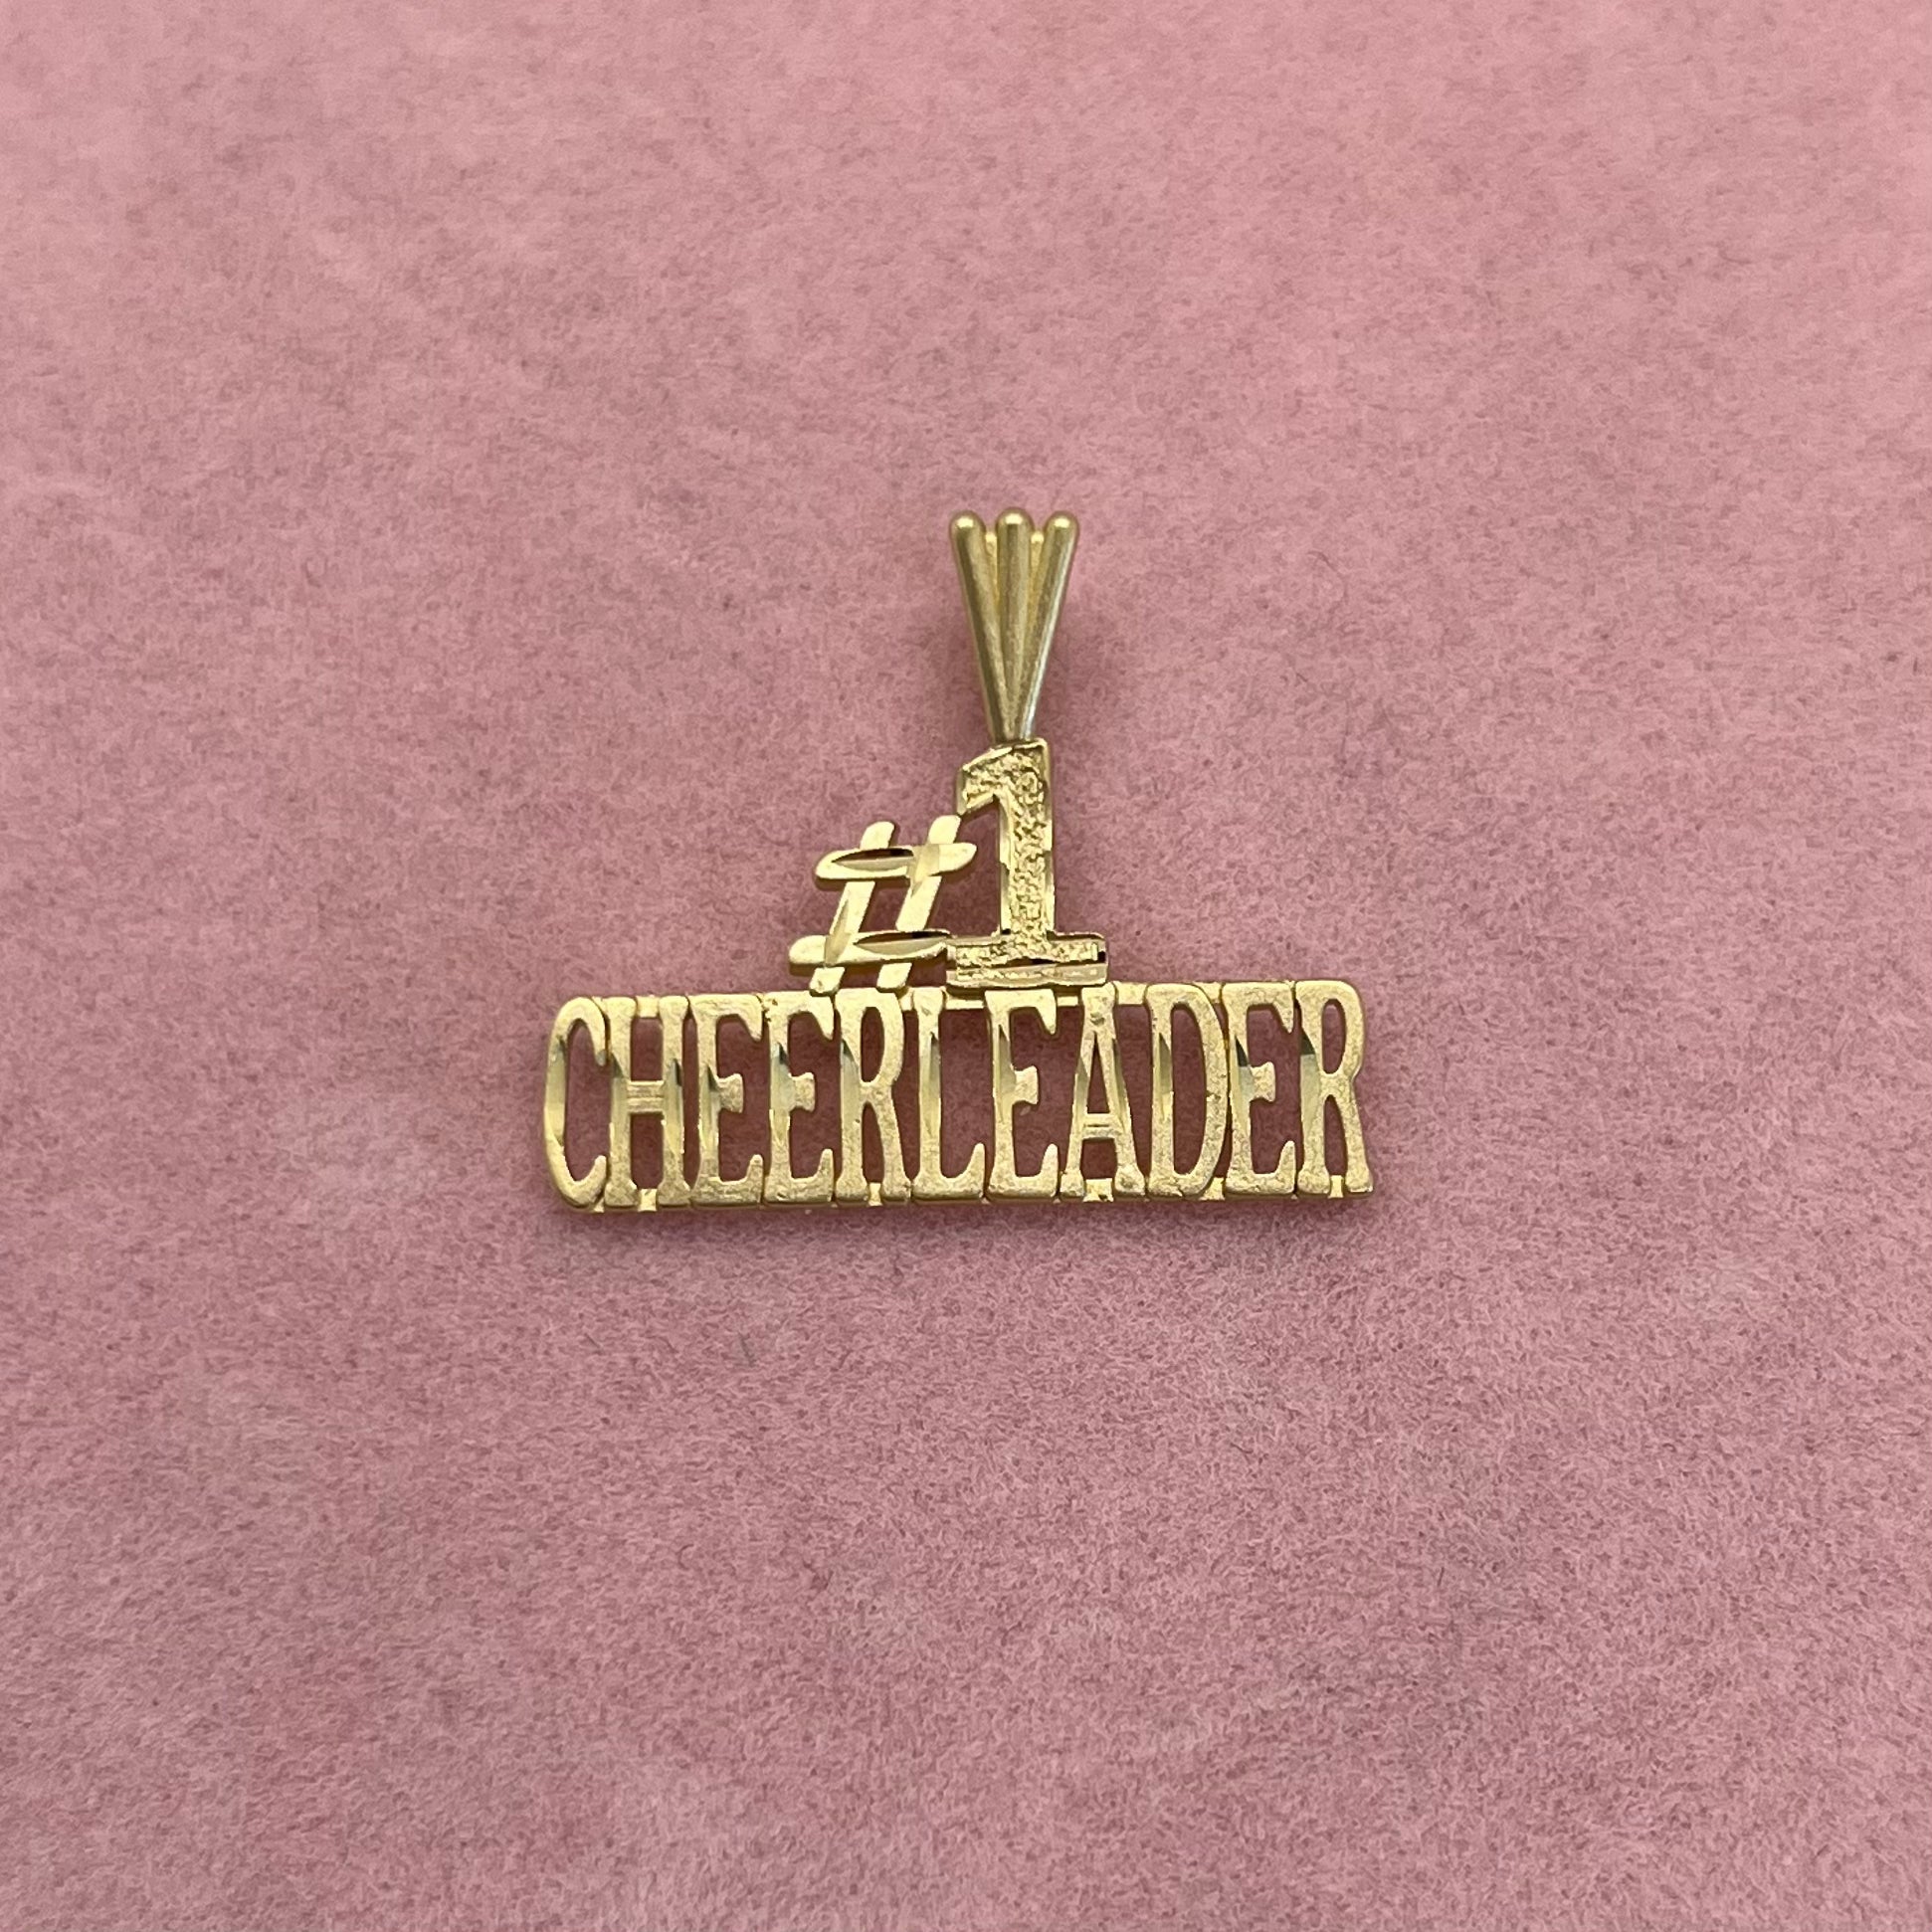 #1 Cheerleader Charm by Michael Anthony